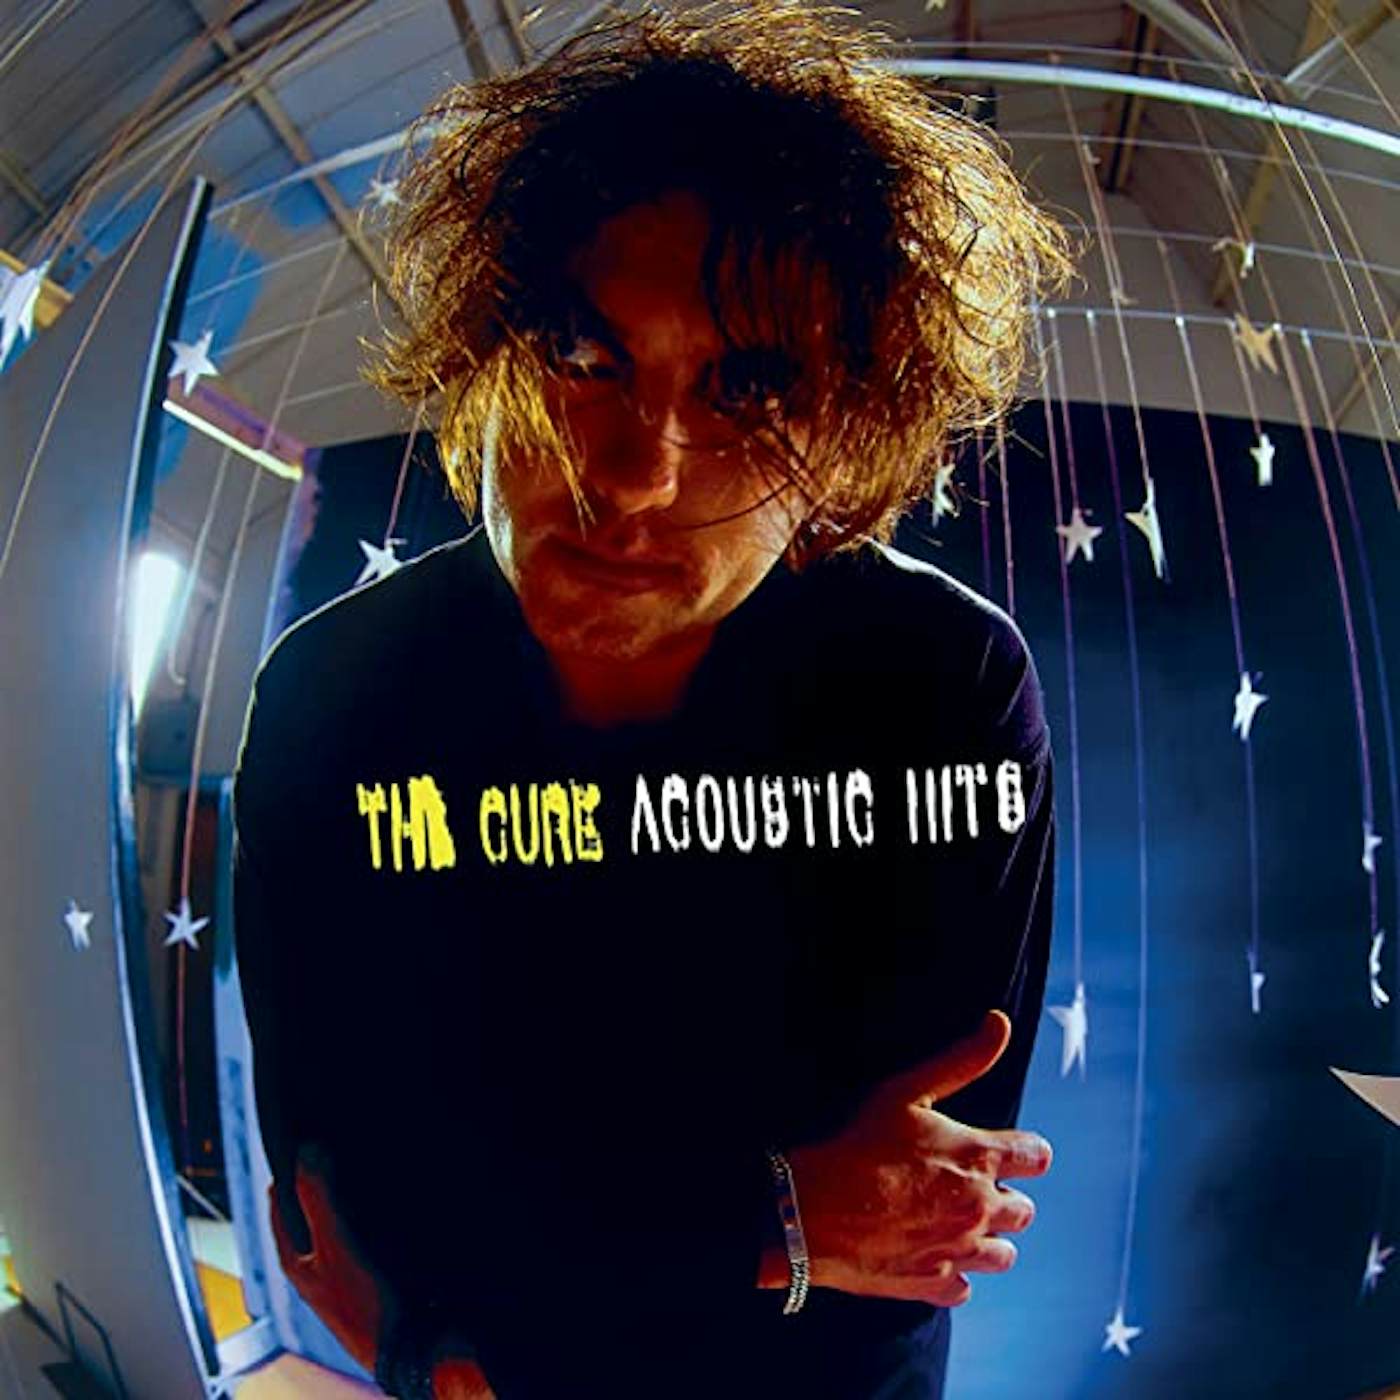 The Cure GREATEST HITS ACOUSTIC (2LP) Vinyl Record